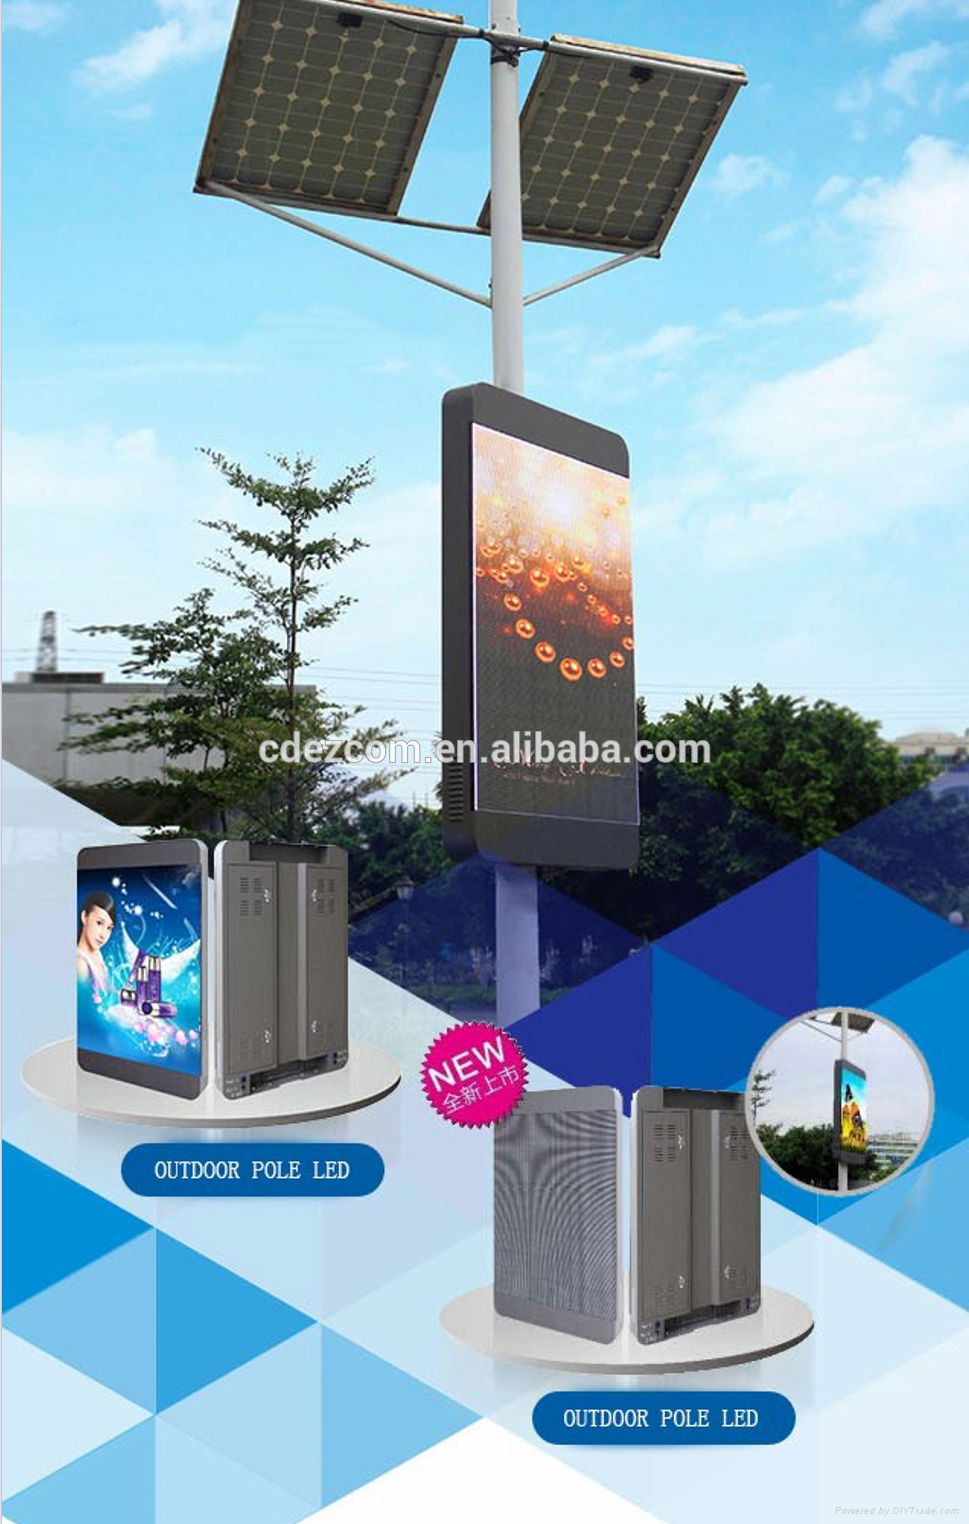 P4 P5 P6 P7 P8 P10 P16 Outdoor Lamp Post Pole LED Screen for Advertising 5